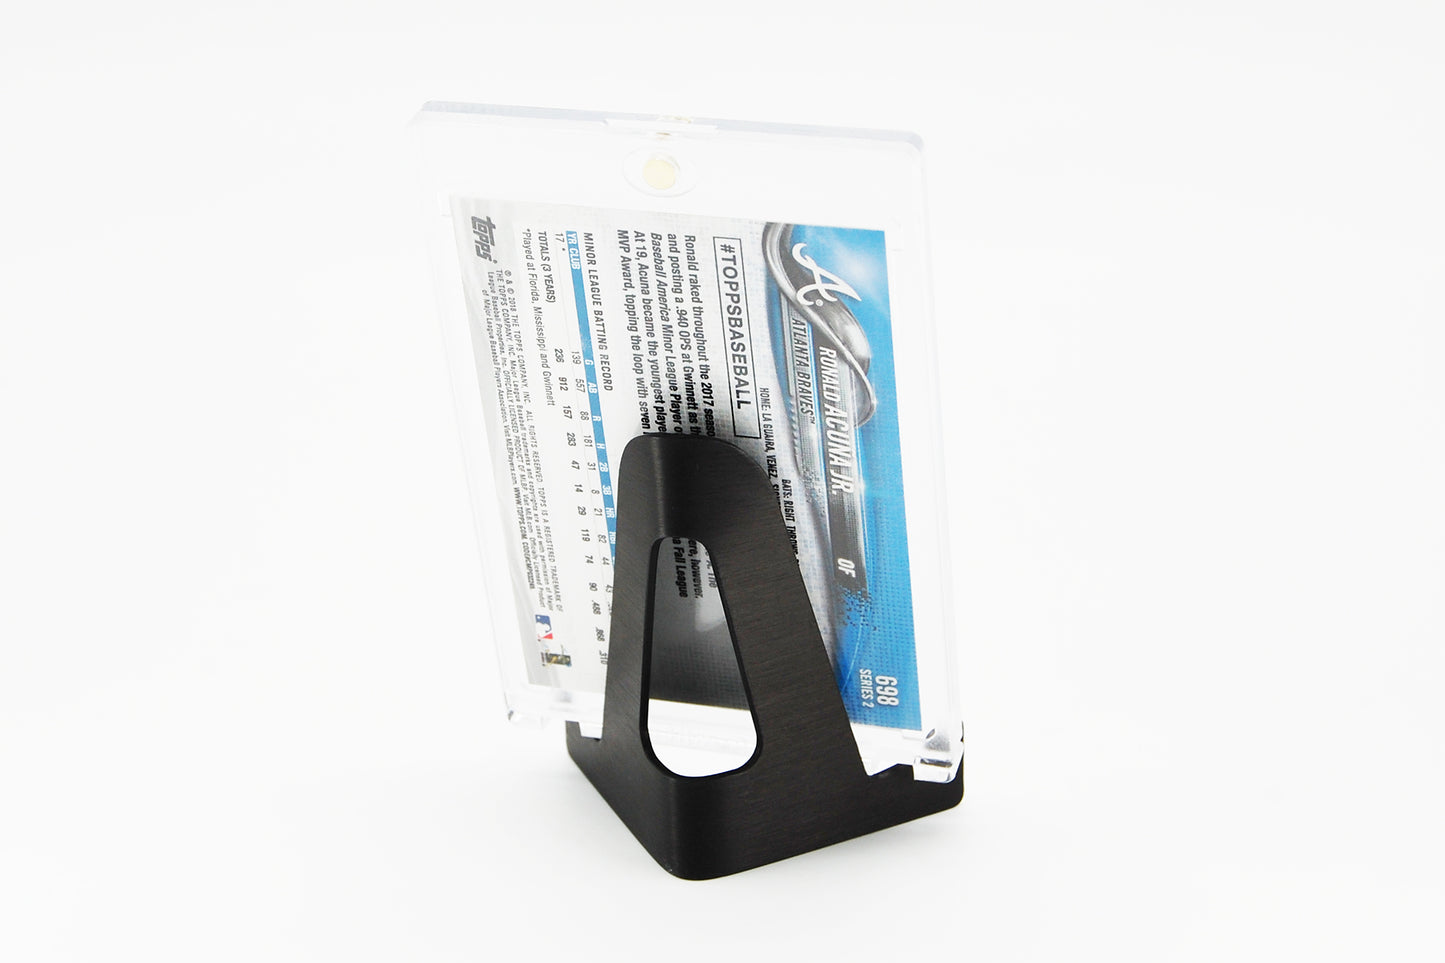 Aluminum Easel Style Card Stands for Most Magnetic Card Holders (up to 55 pts.)